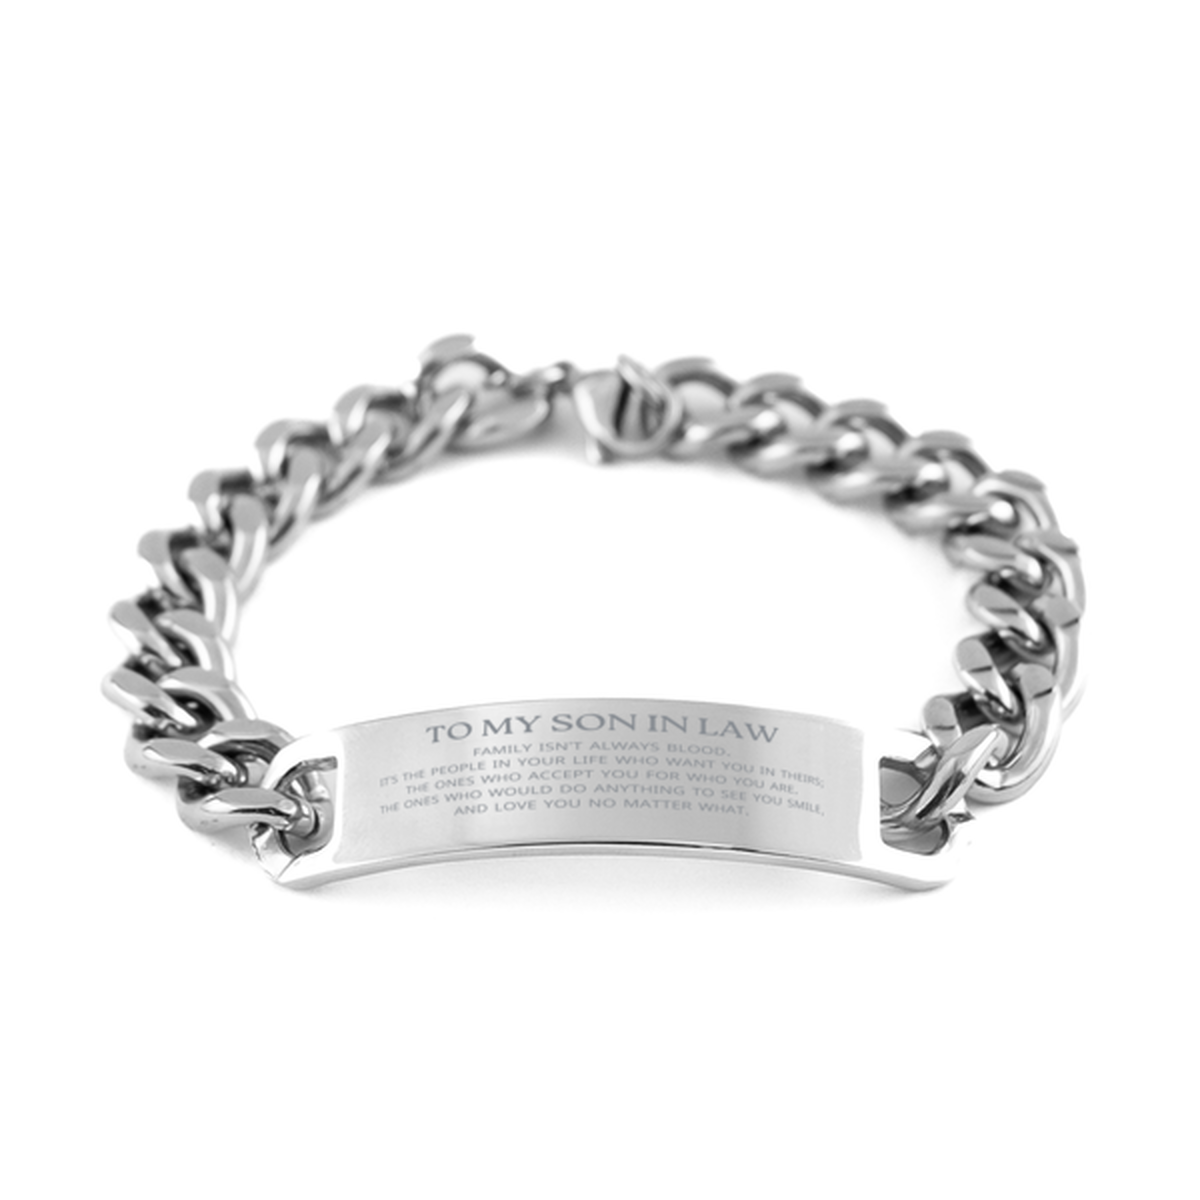 To My Son In Law Gifts, Family isn't always blood, Son In Law Cuban Chain Stainless Steel Bracelet, Birthday Christmas Unique Present For Son In Law